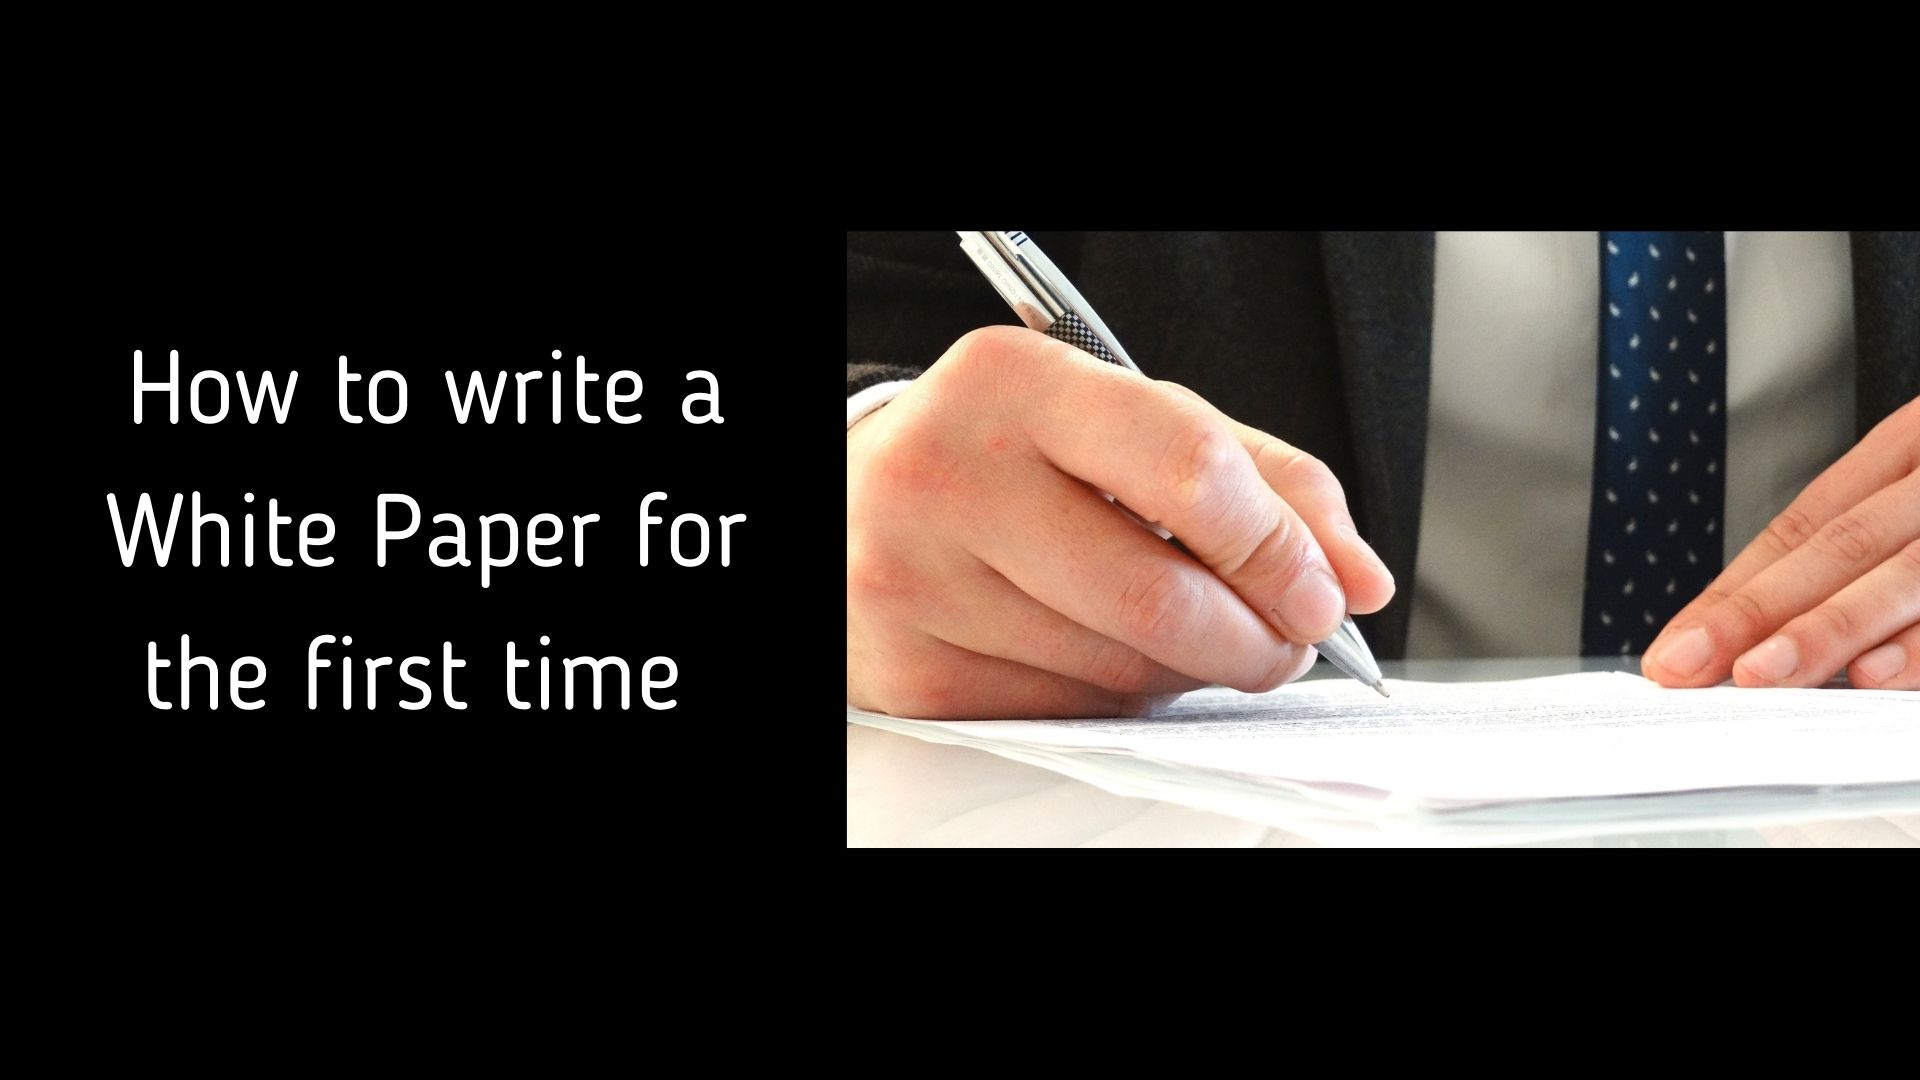 How to write a white paper for the first time in 20 practical steps